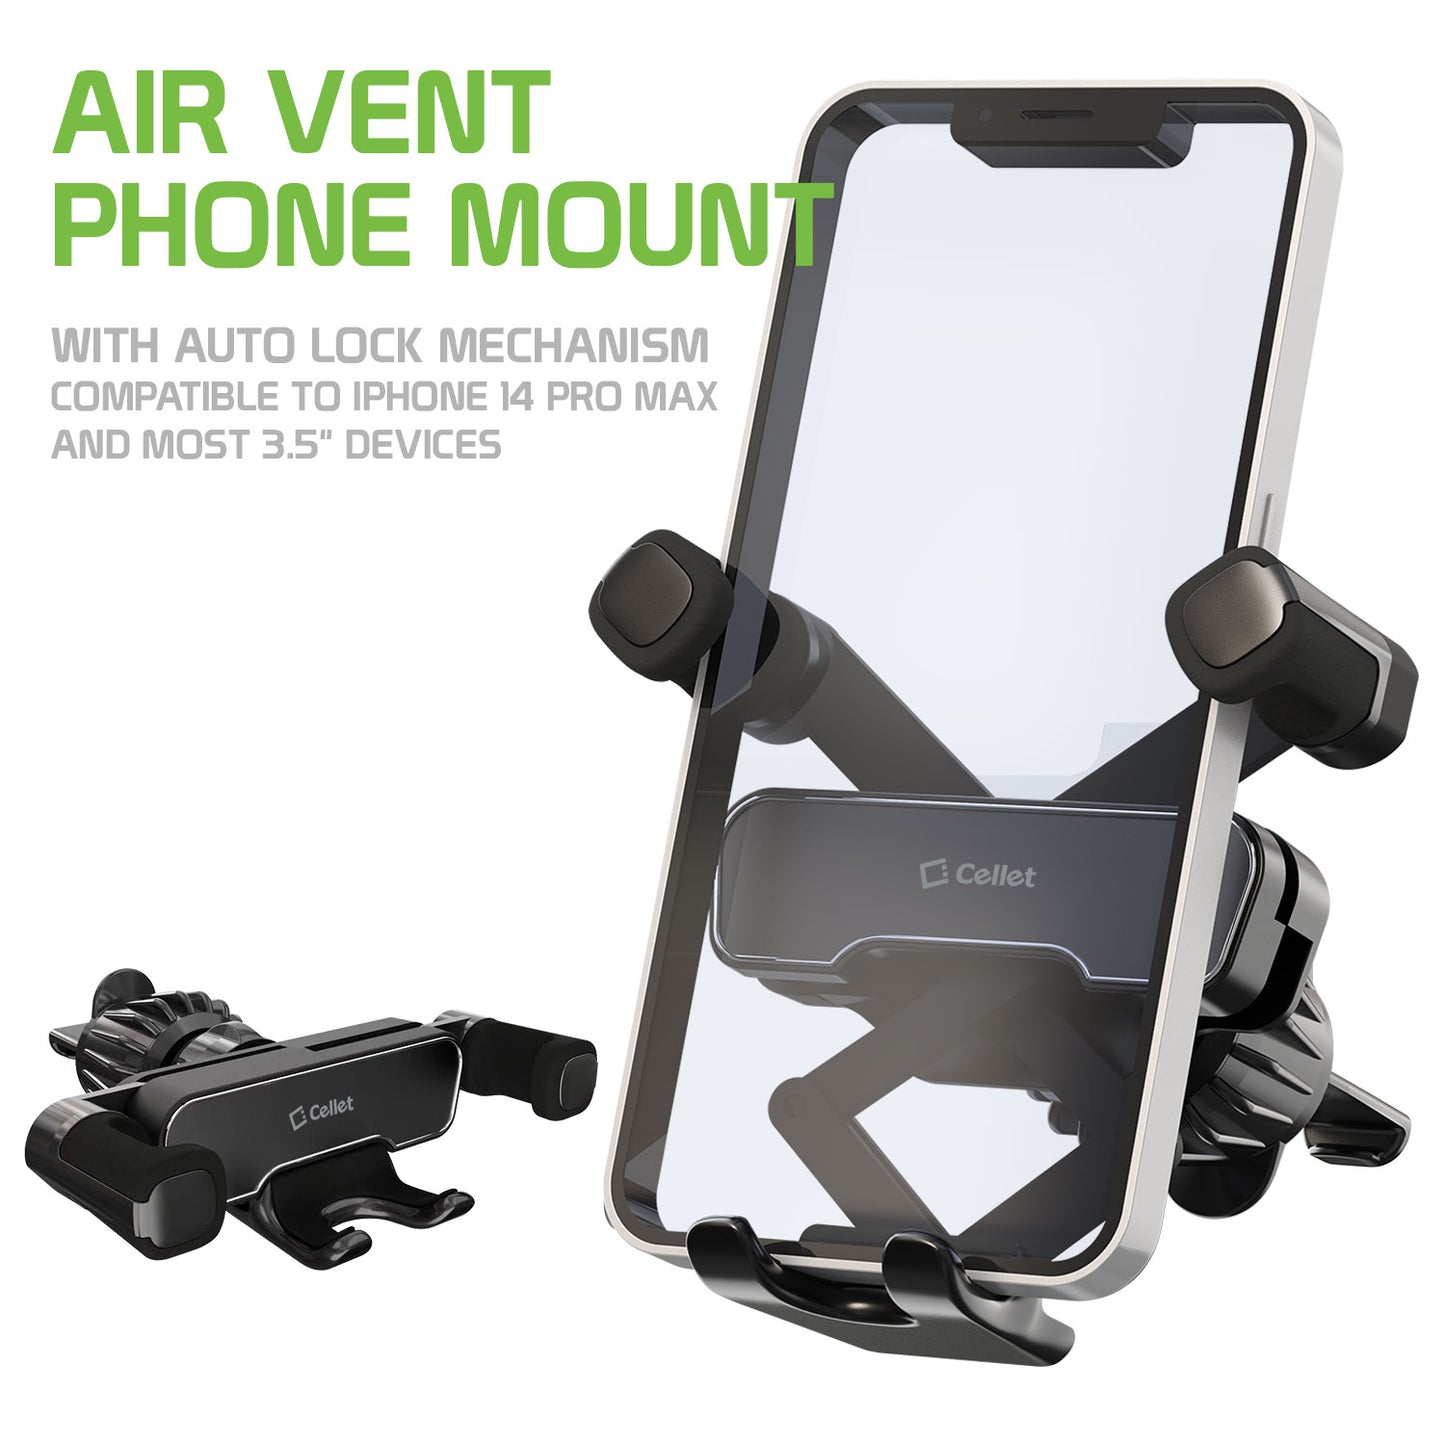 PH130 - Gravity Phone Mount, Air vent Phone Mount with Auto Lock Mechanism Compatible to iPhone 14 Pro Max and most 3.5" devices